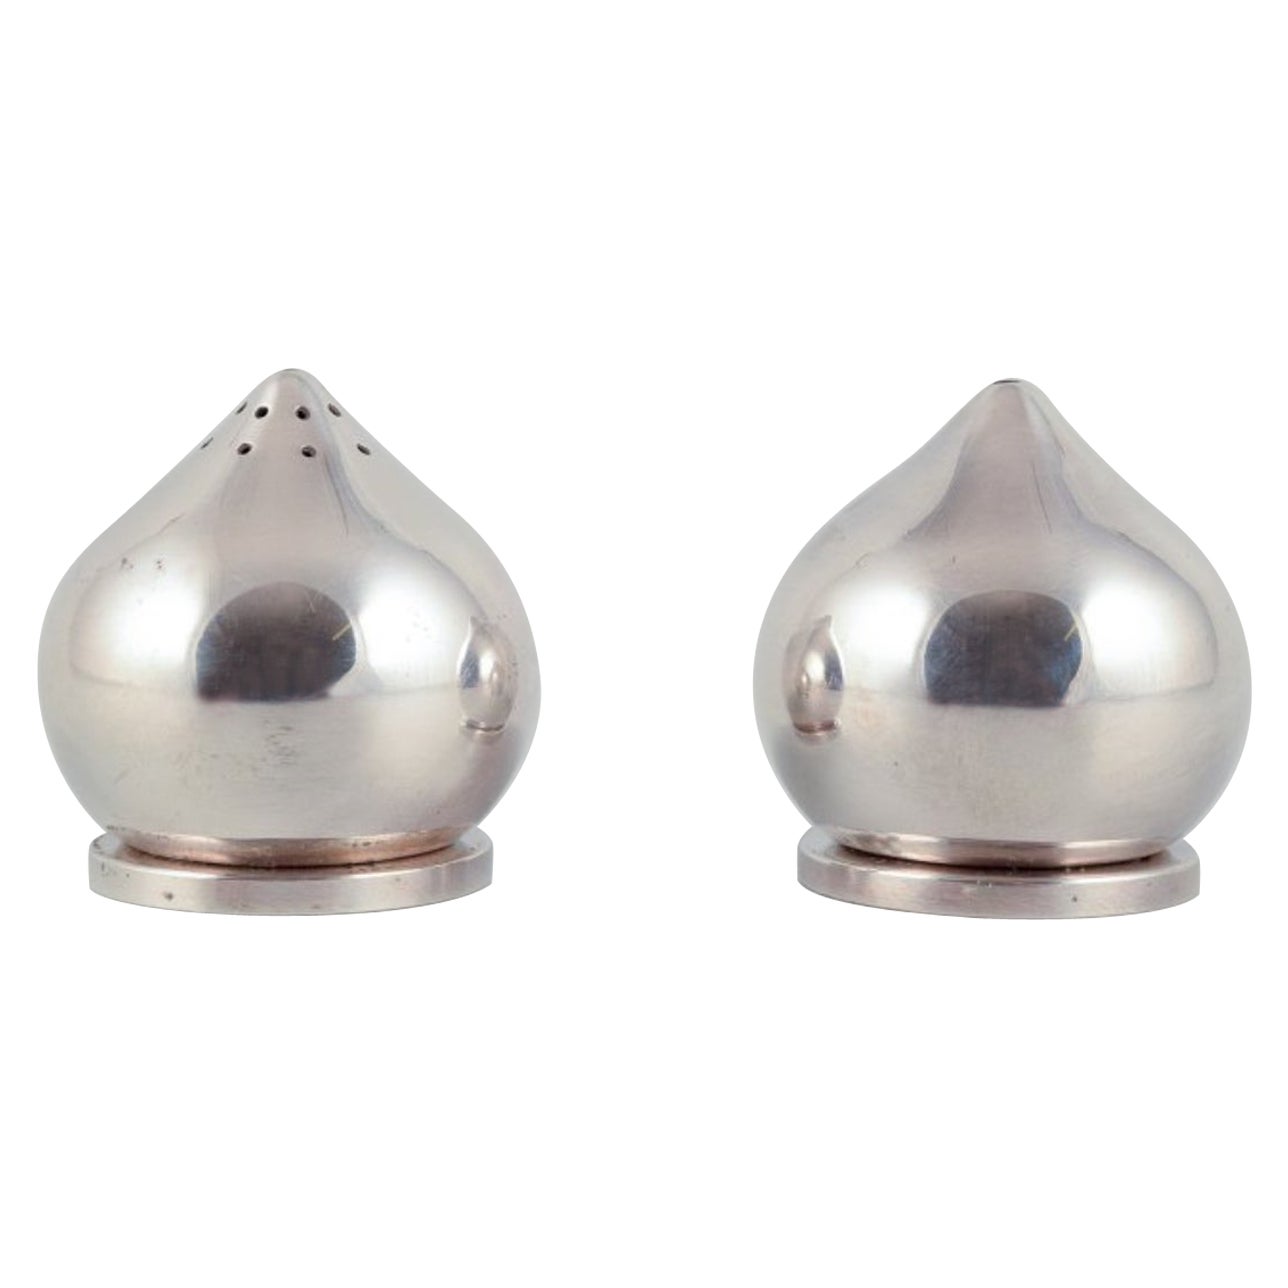 Aage Weimar. A pair of modernist salt and pepper shakers in sterling silver. For Sale